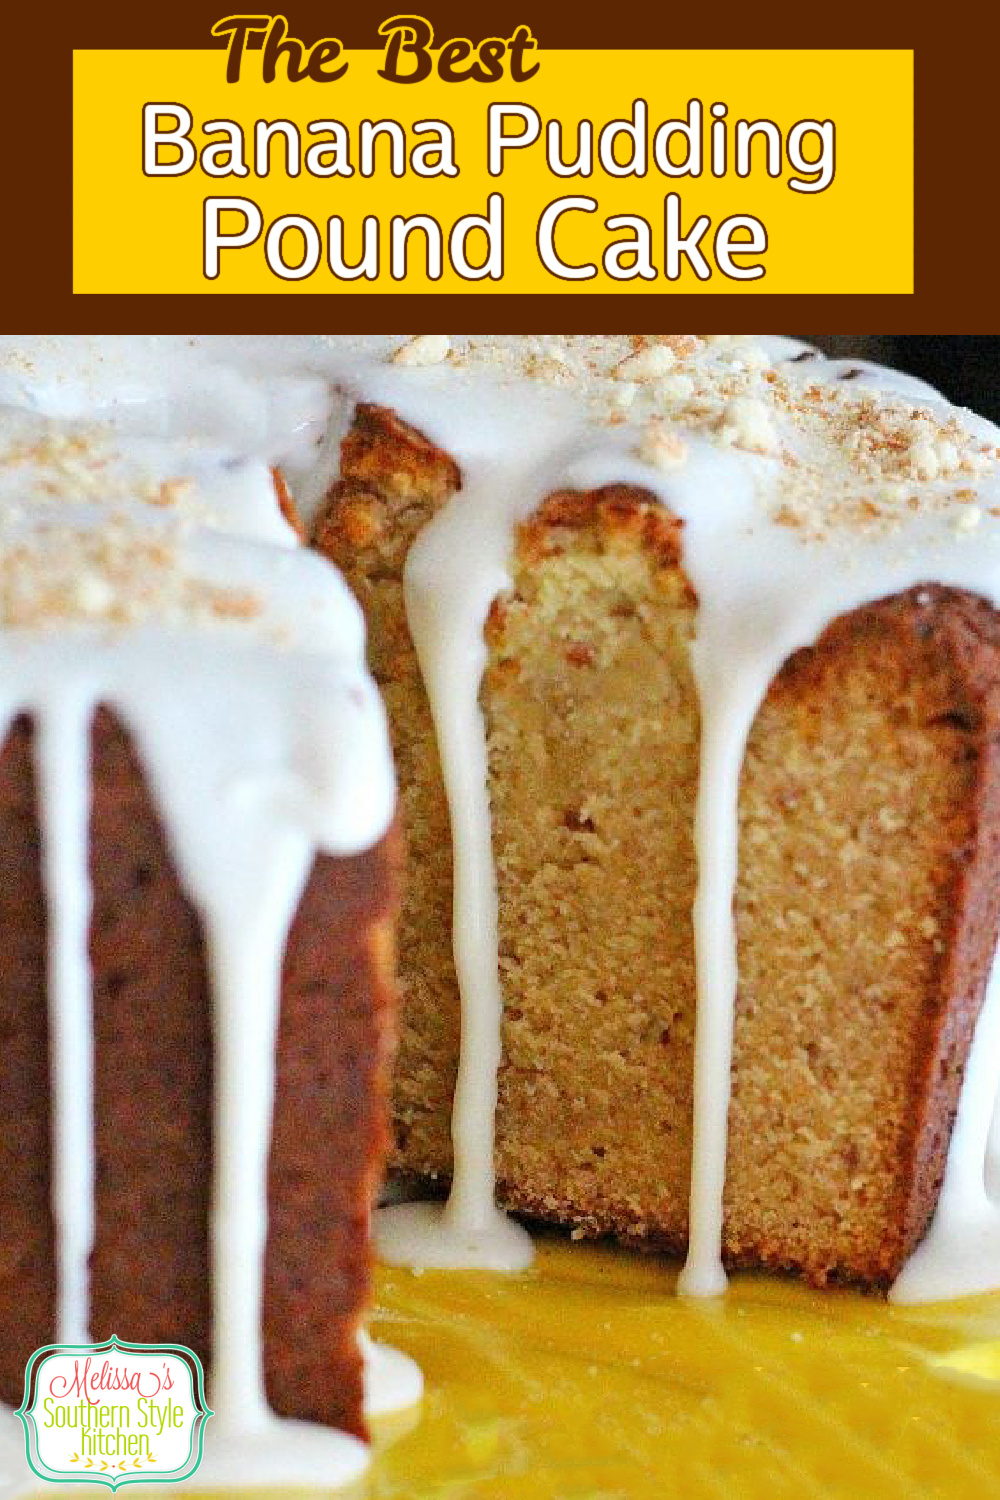 Pound cake and banana pudding collide in this decadent Banana Pudding Cream Cheese Pound Cake #southernpoundcake #bananacake #bananapudding #southerncakes #cakes #poundcakerecipes #bestbananacake #bananapuddingpoundcake #creamcheesepoundcake